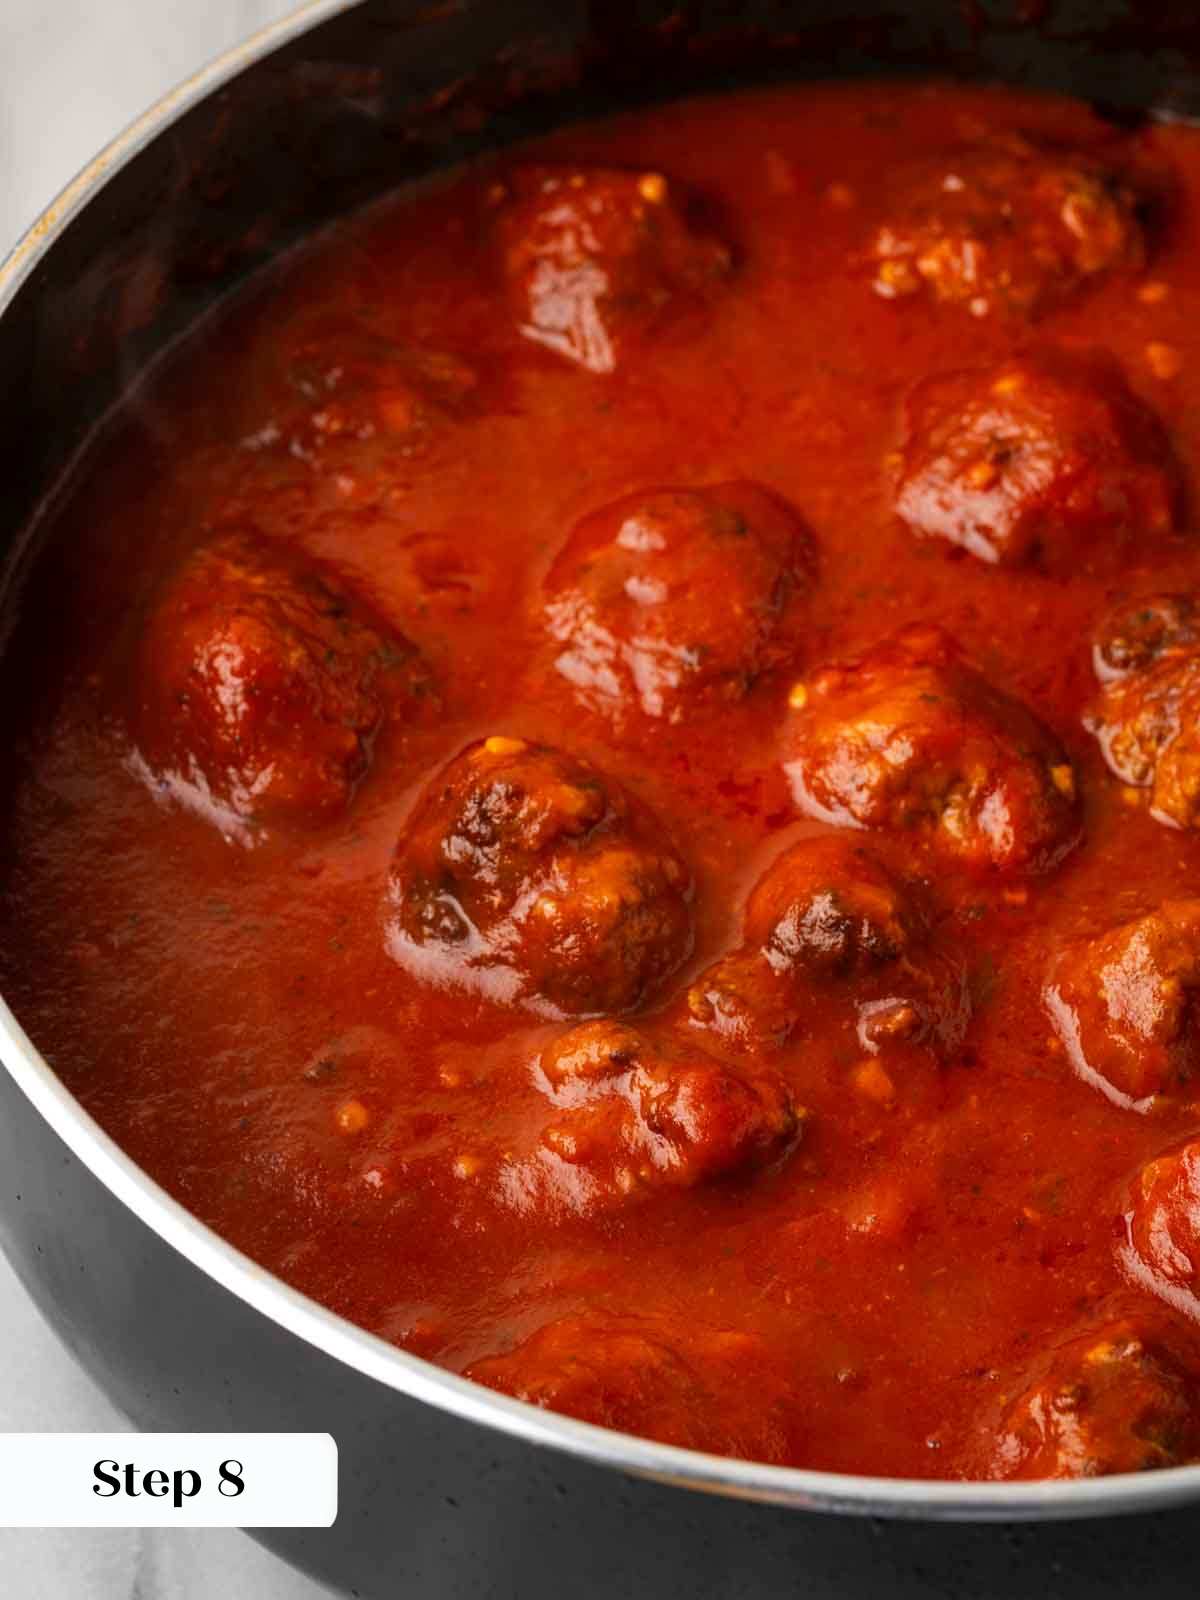 meatballs cooking in red sauce.